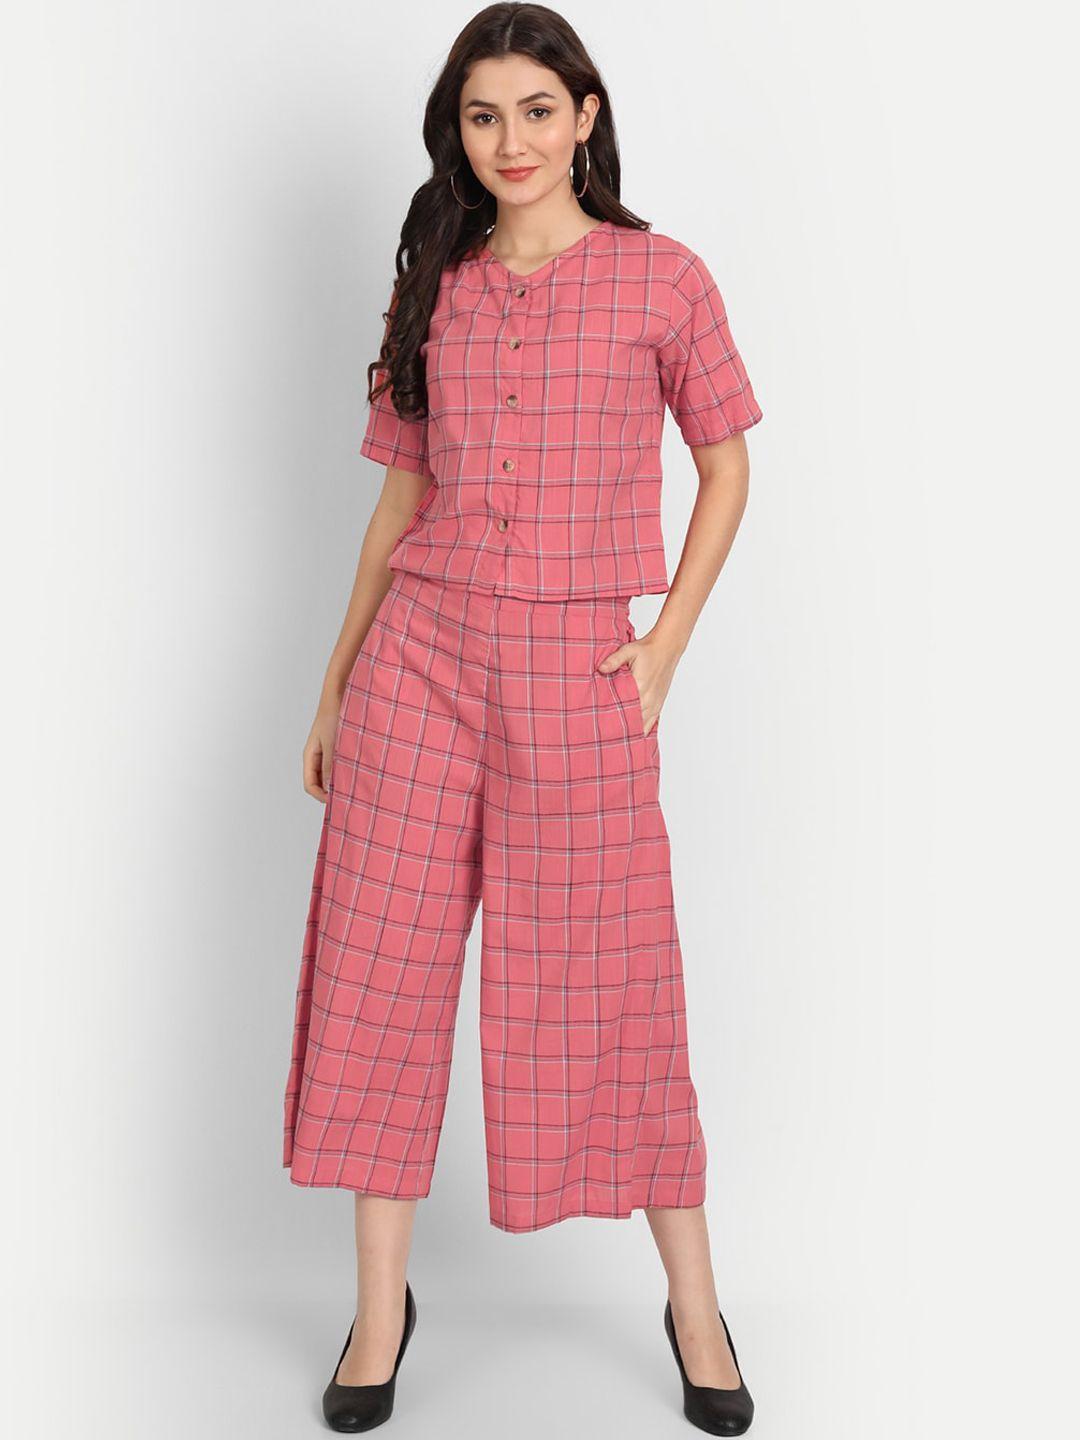 aaruvi ruchi verma women pink checked co-ords